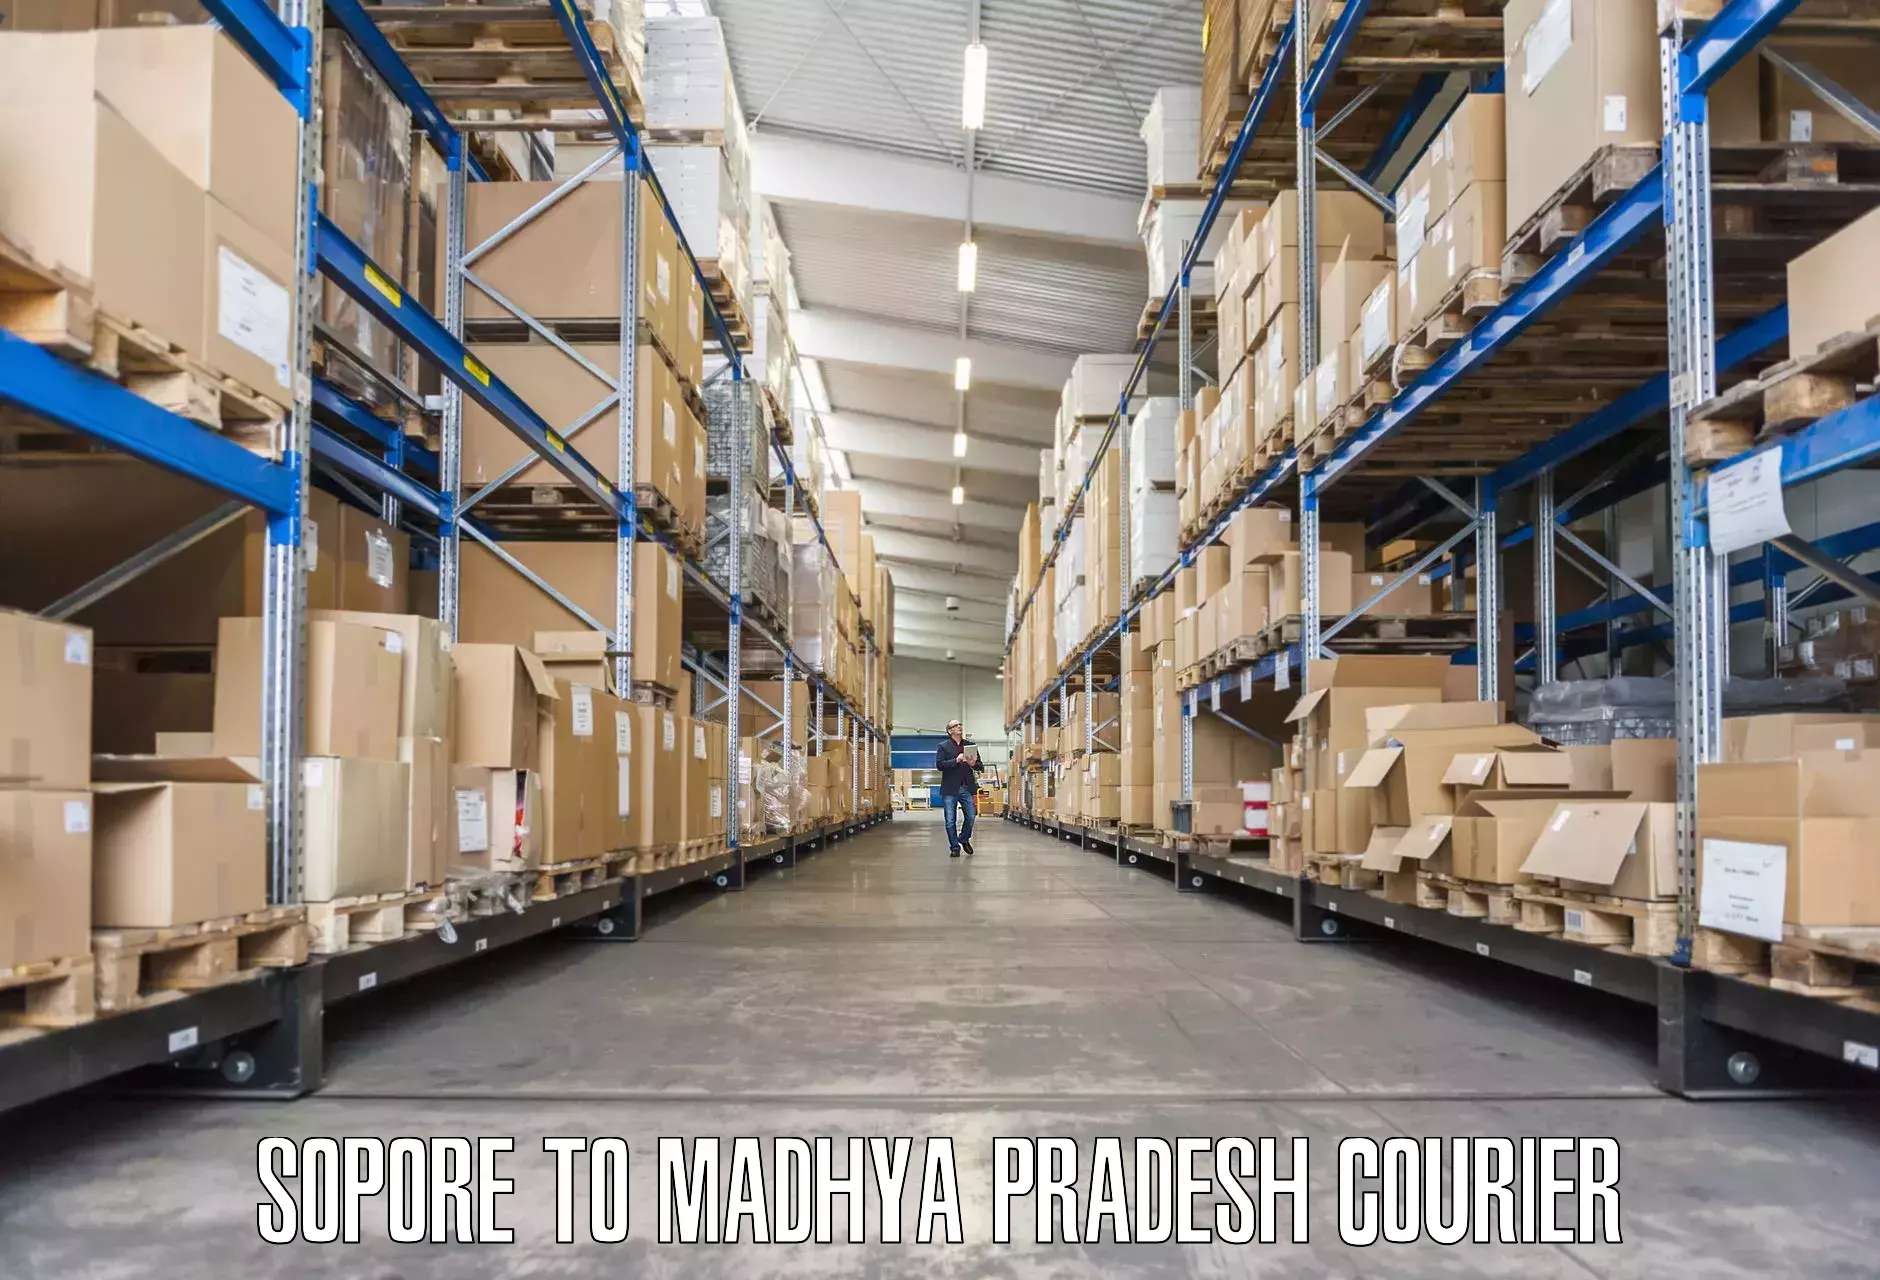 Cost-effective moving options Sopore to Madhya Pradesh